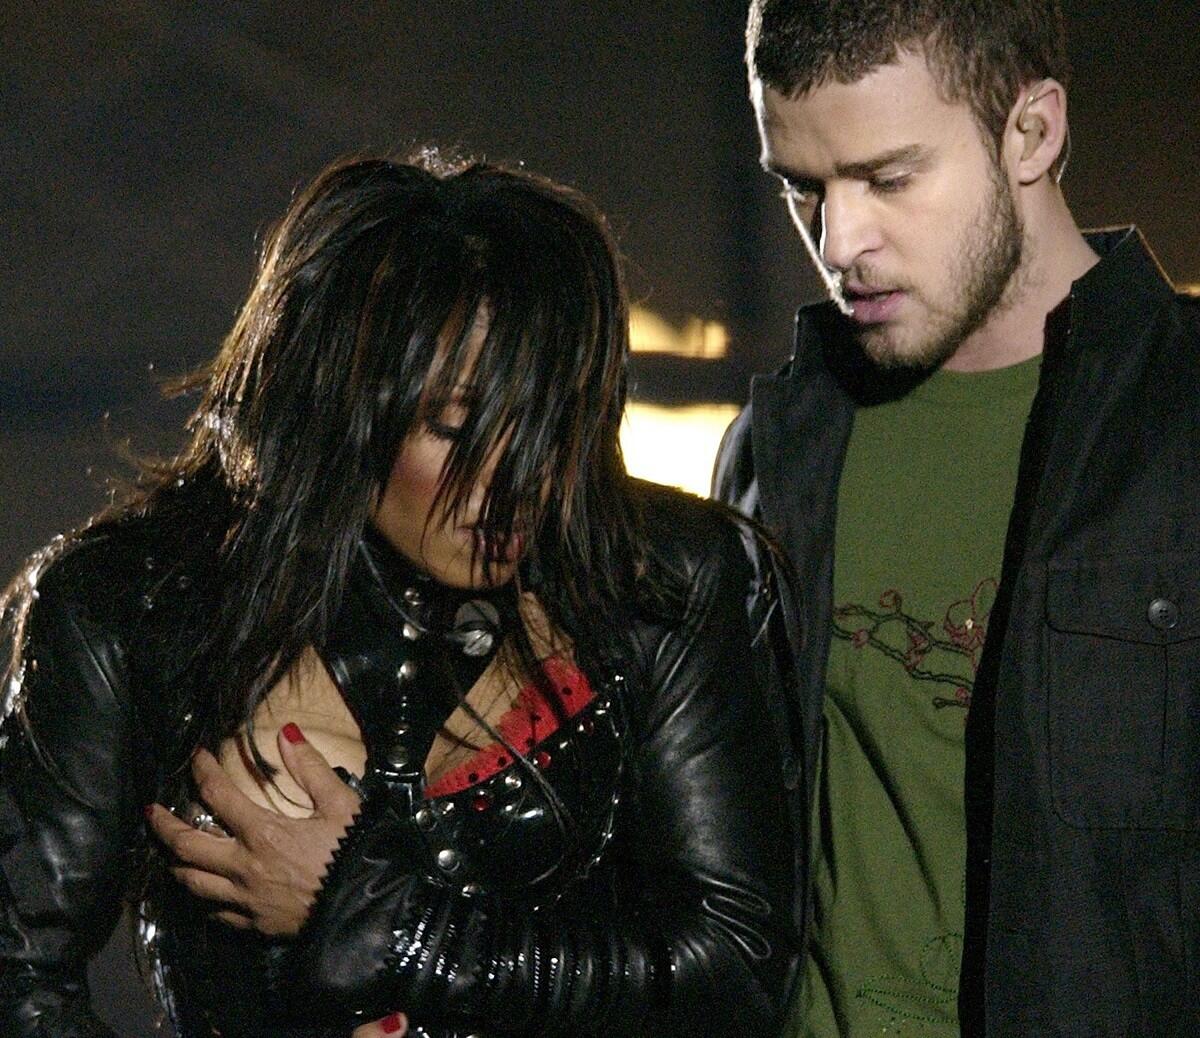 FILE - In this Sunday Feb. 1, 2004 file photo, entertainer Janet Jackson, left, covers her breast after her outfit came undone during the half time performance with Justin Timberlake at Super Bowl XXXVIII in Houston. The Supreme Court on Monday, May 4, 2009 ordered a federal appeals court to re-examine its ruling in favor of CBS Corp. in a legal fight over entertainer Janet Jackson's wardrobe malfunction. (AP Photo/David Phillip, File)